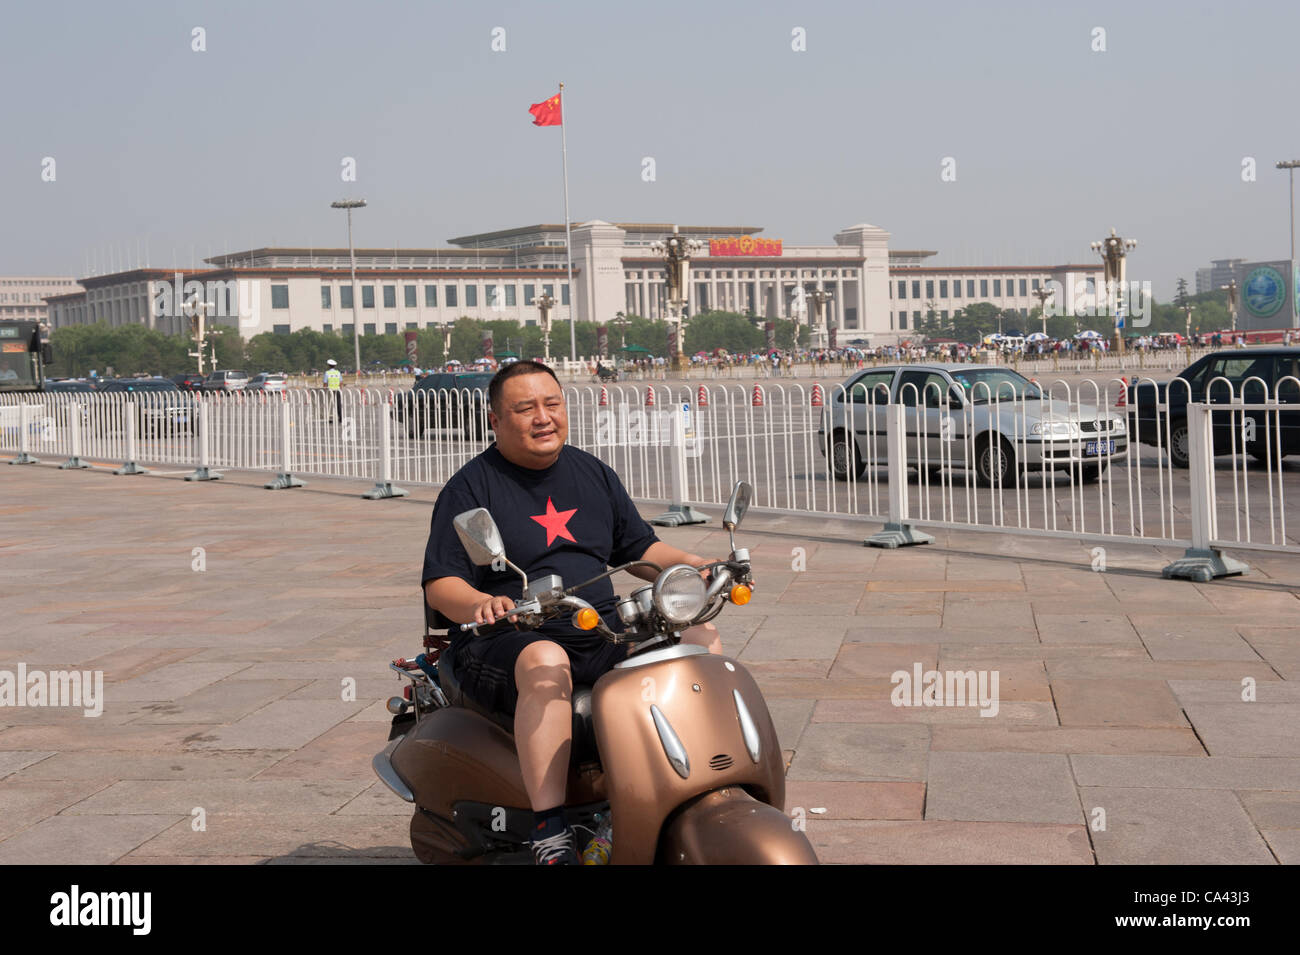 Man driving on a scooter at Tiananmen Square, Beijing, China on Monday June 4, 2012. June 4th 2012 marks the 23rd anniversary of the military crackdown on students protests at Tiananmen Square in 1989. Stock Photo